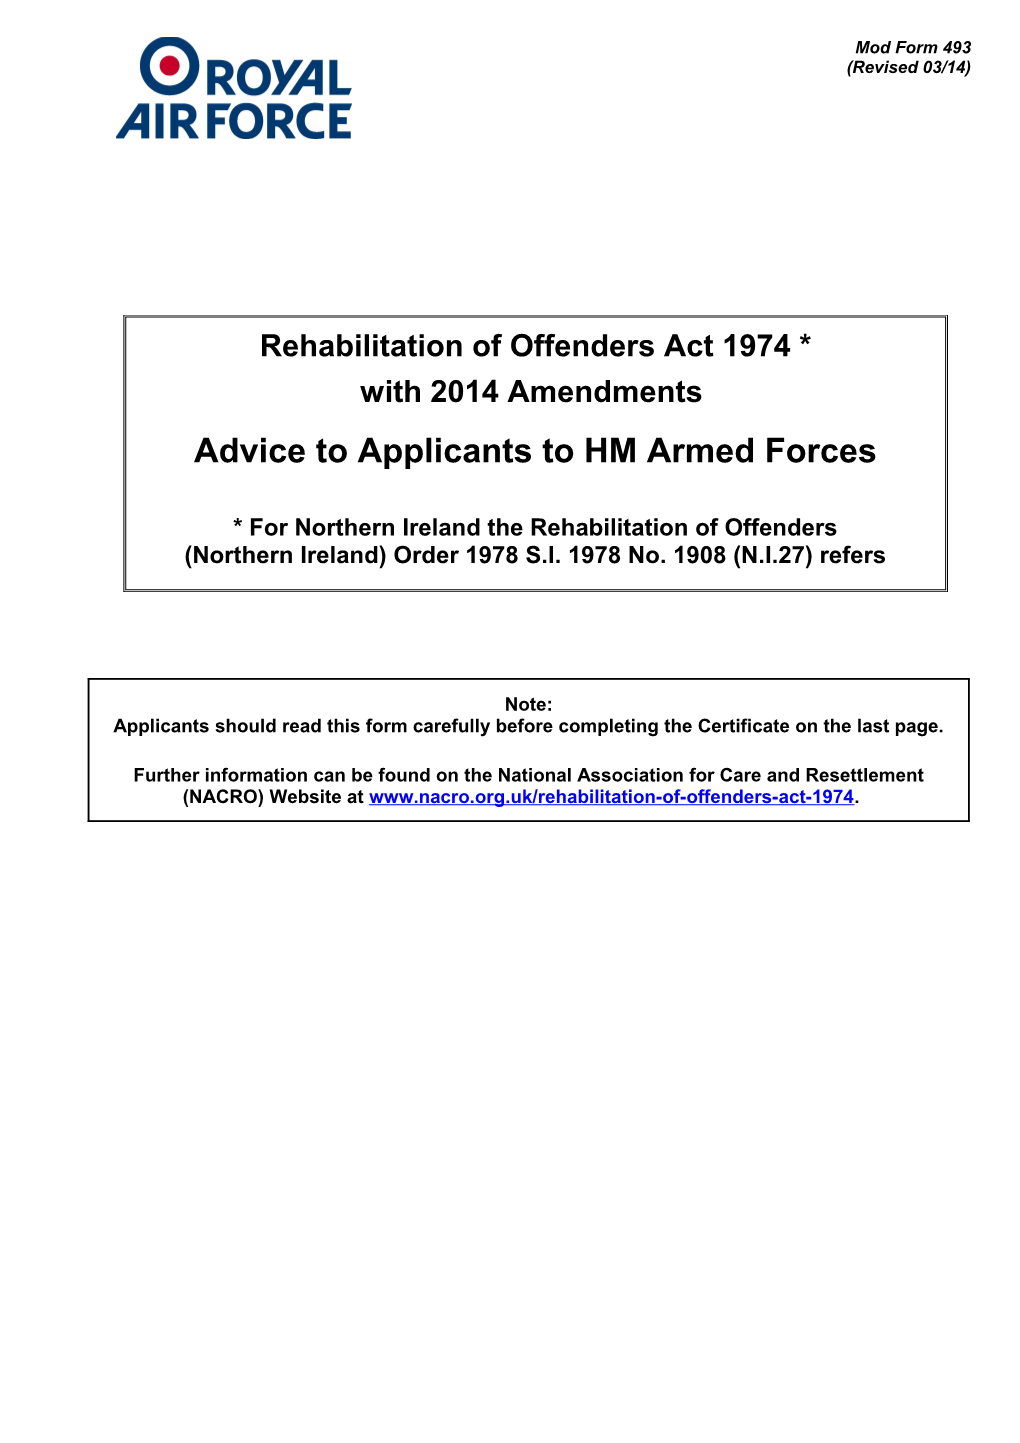 Rehabilitation of Offenders Act 1974 * (See Note 1) - Advice to Applicants to HM Armed Forces